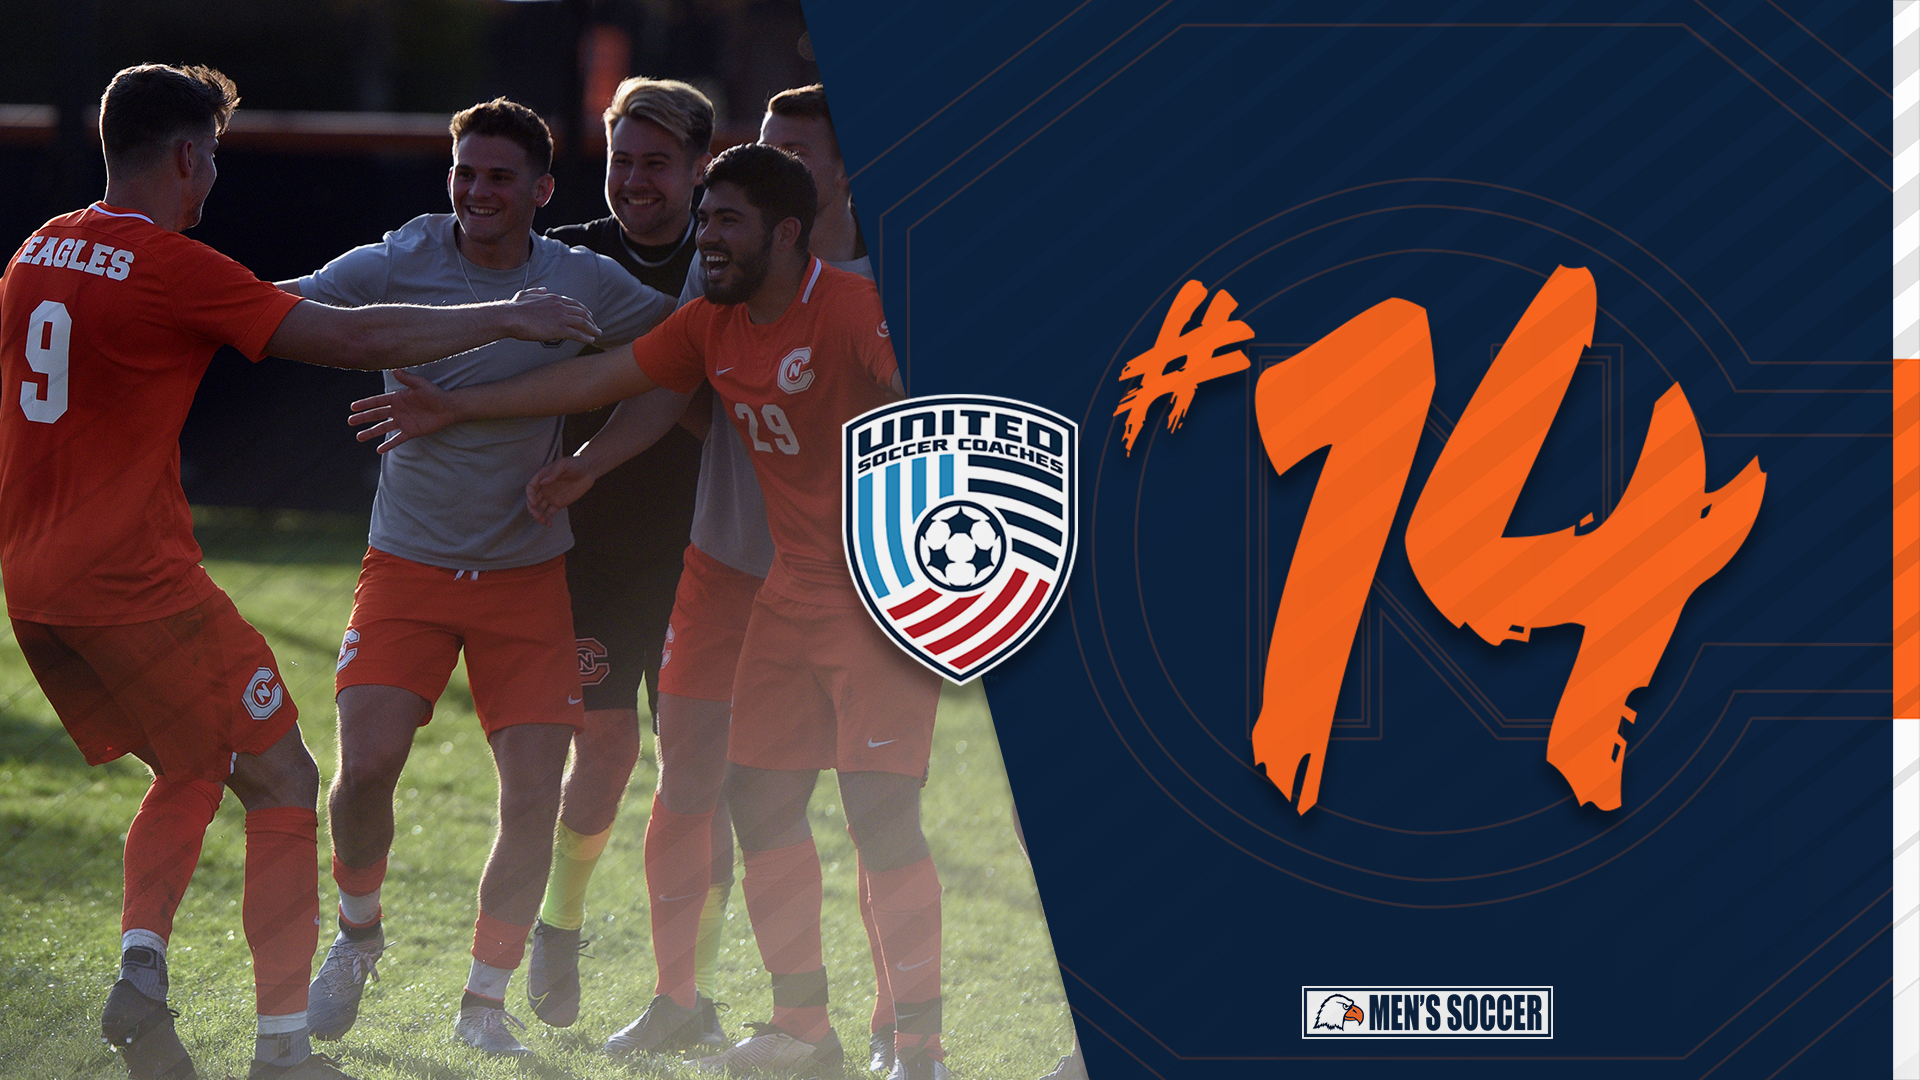 Eagles break into United Soccer Coaches ranking at No. 14